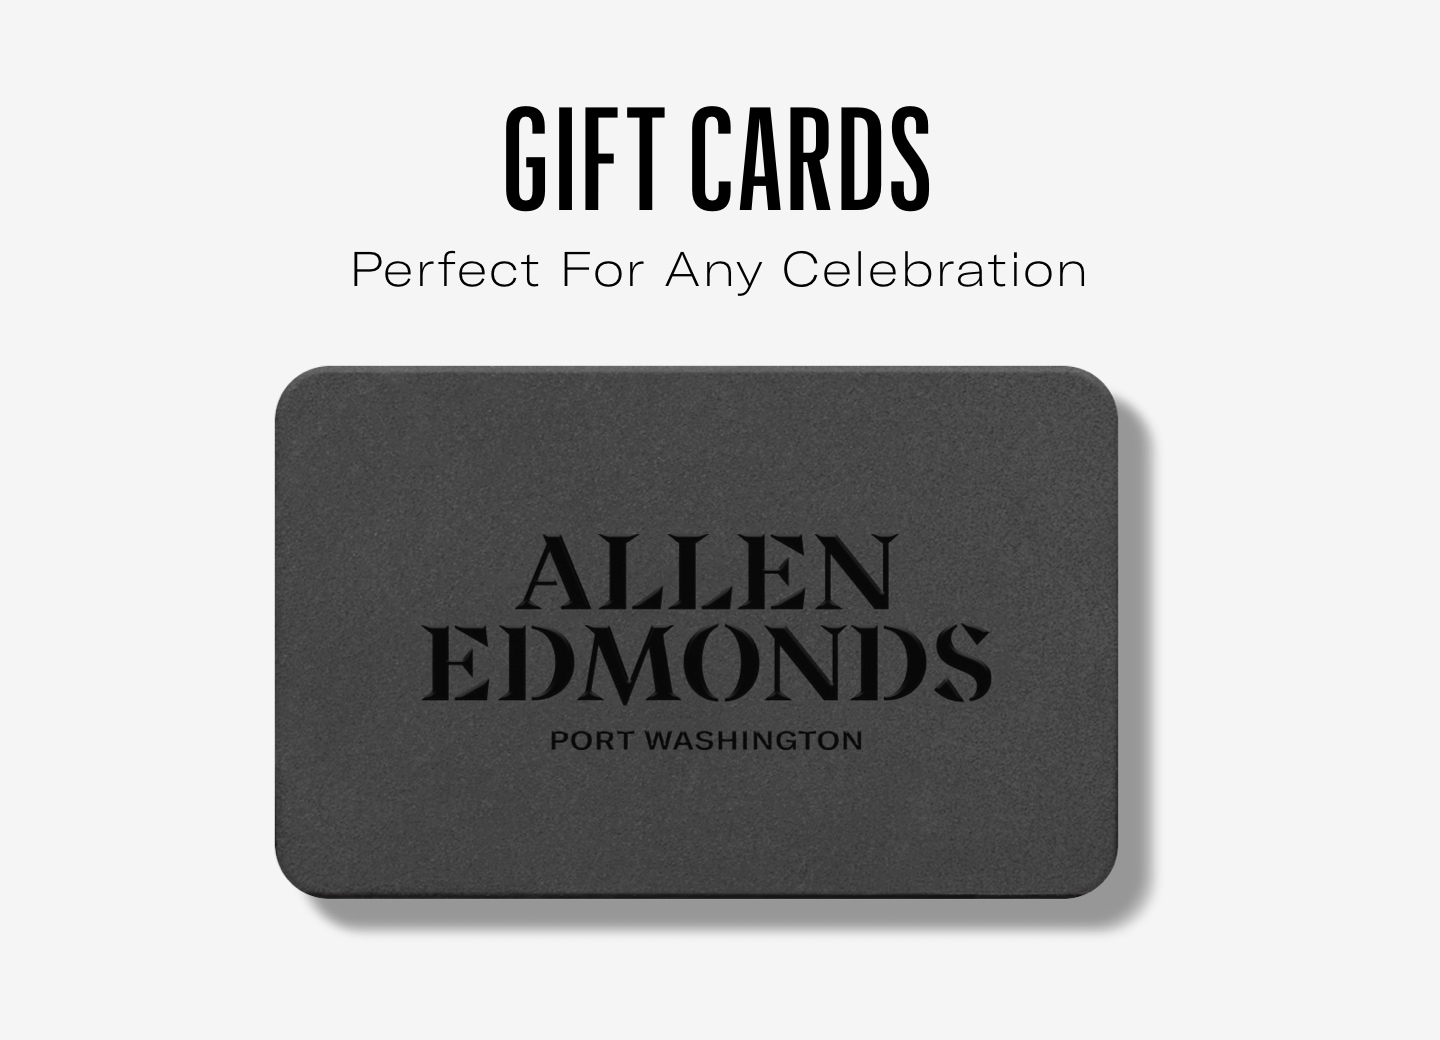 The Perfect Gift | Shop Gifts Cards